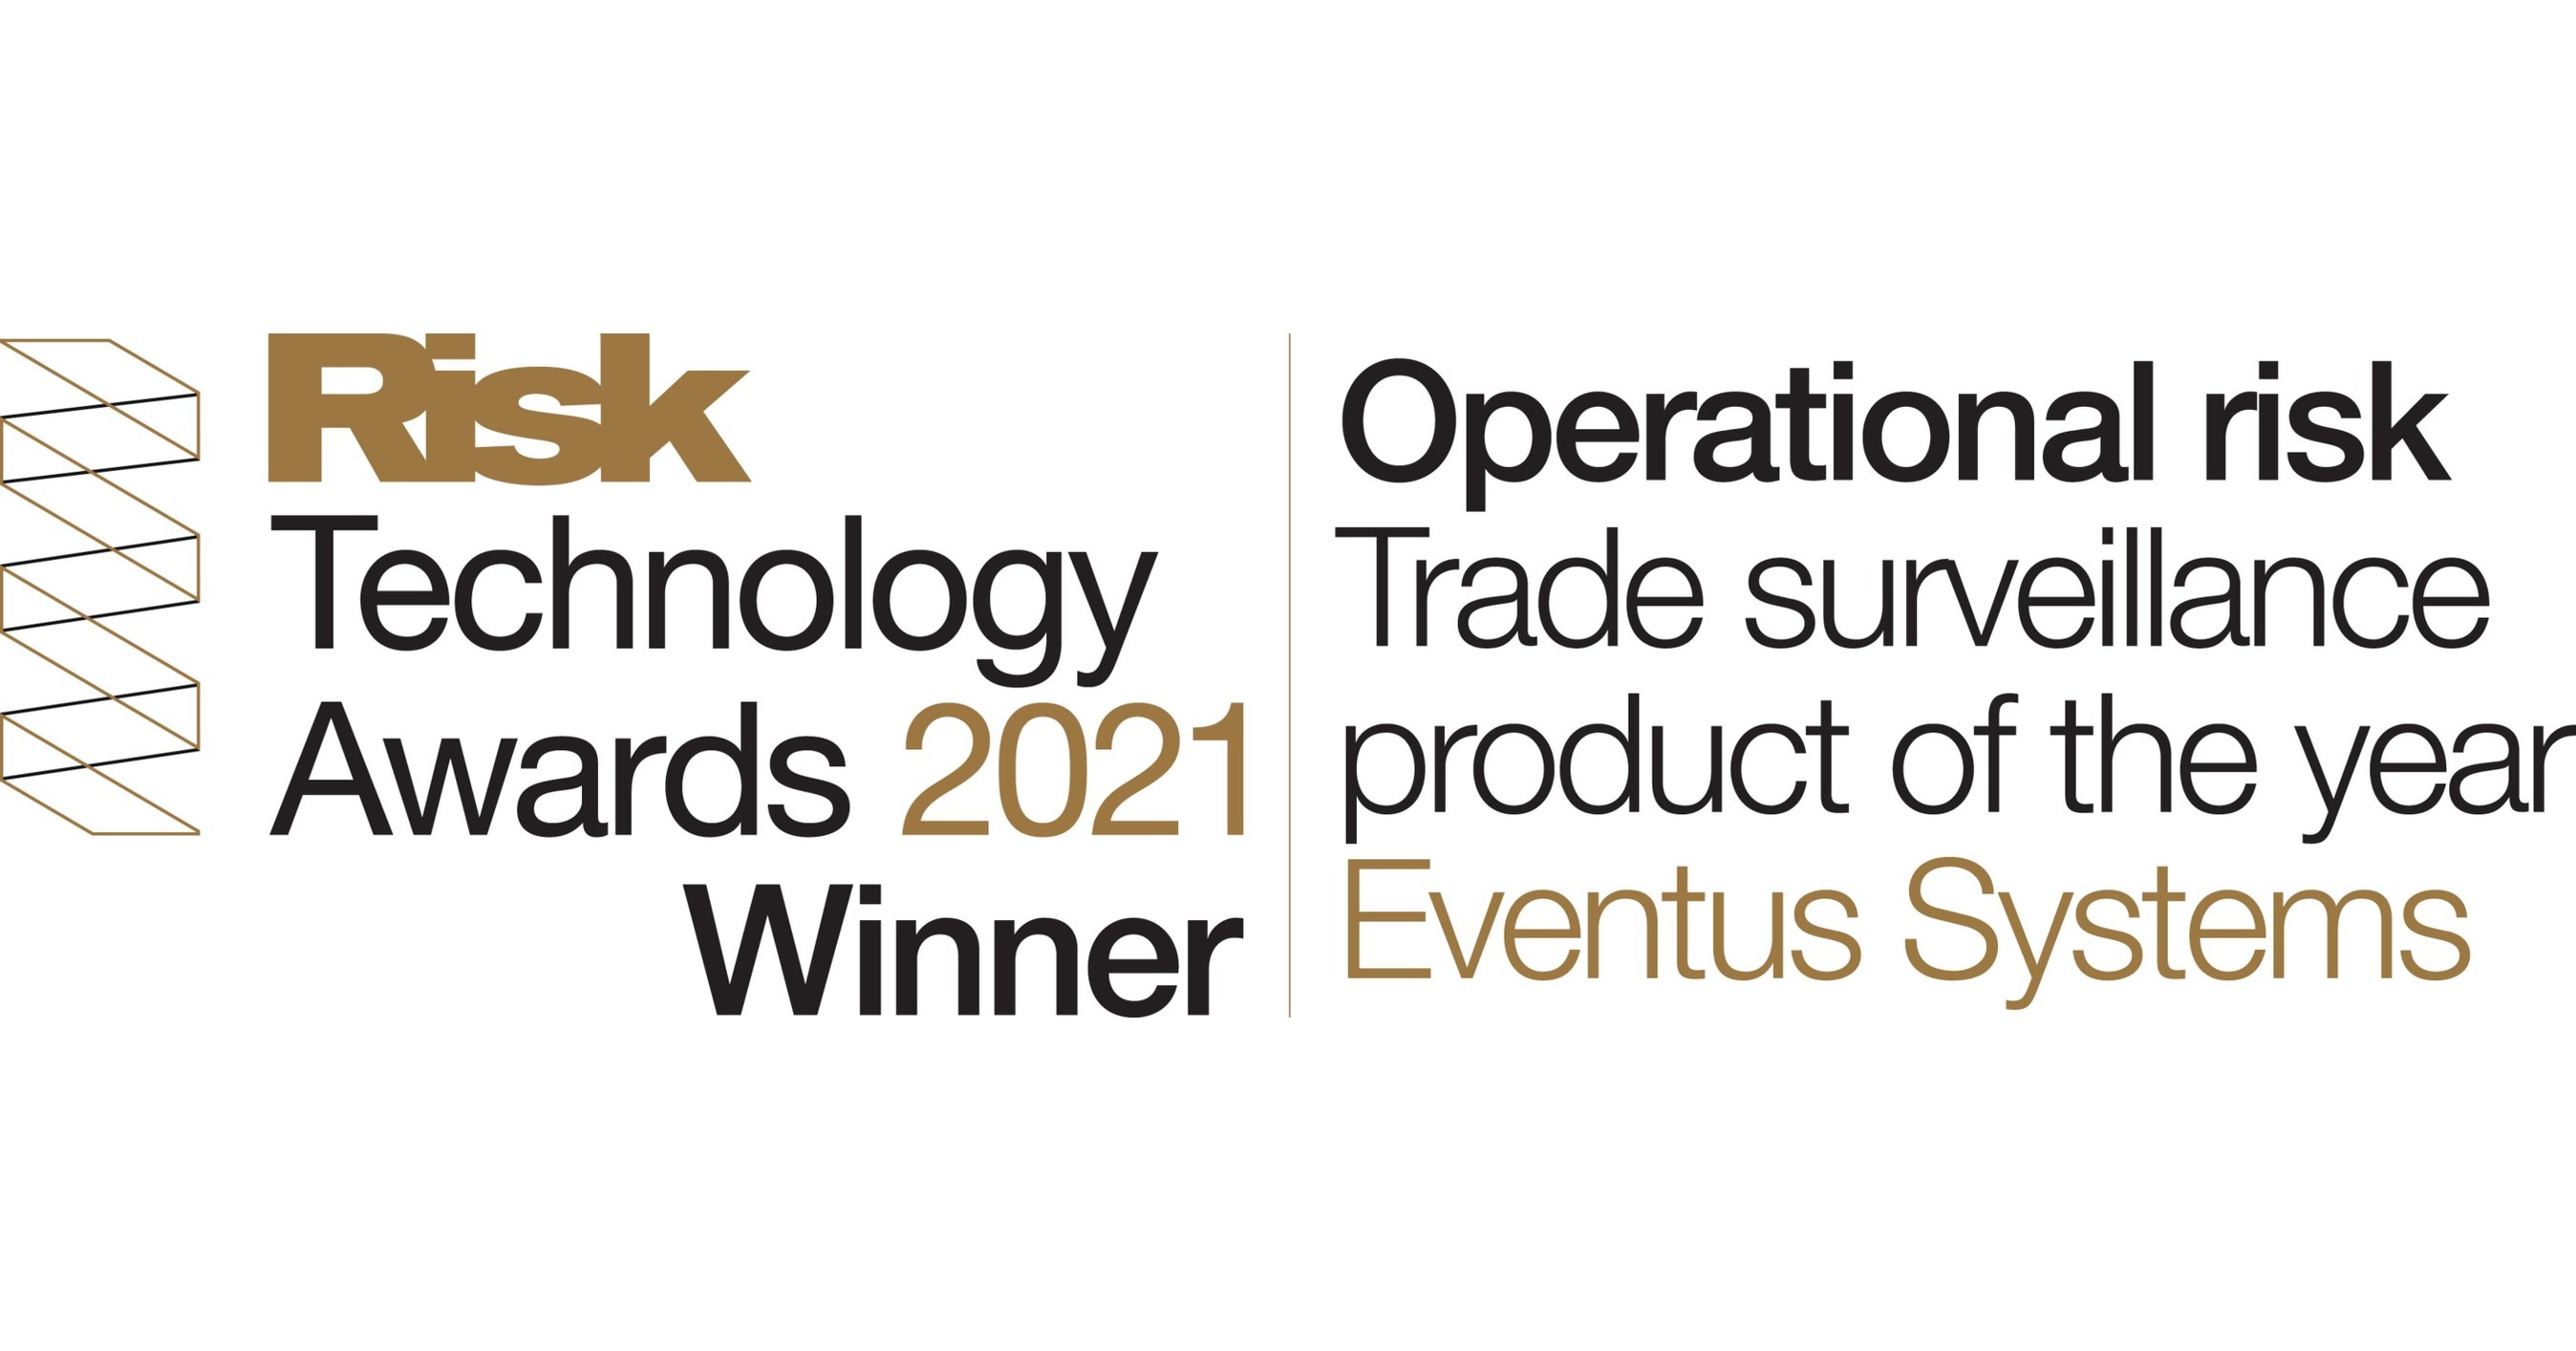 Eventus Systems wins Trade Surveillance Product of the Year in 2021